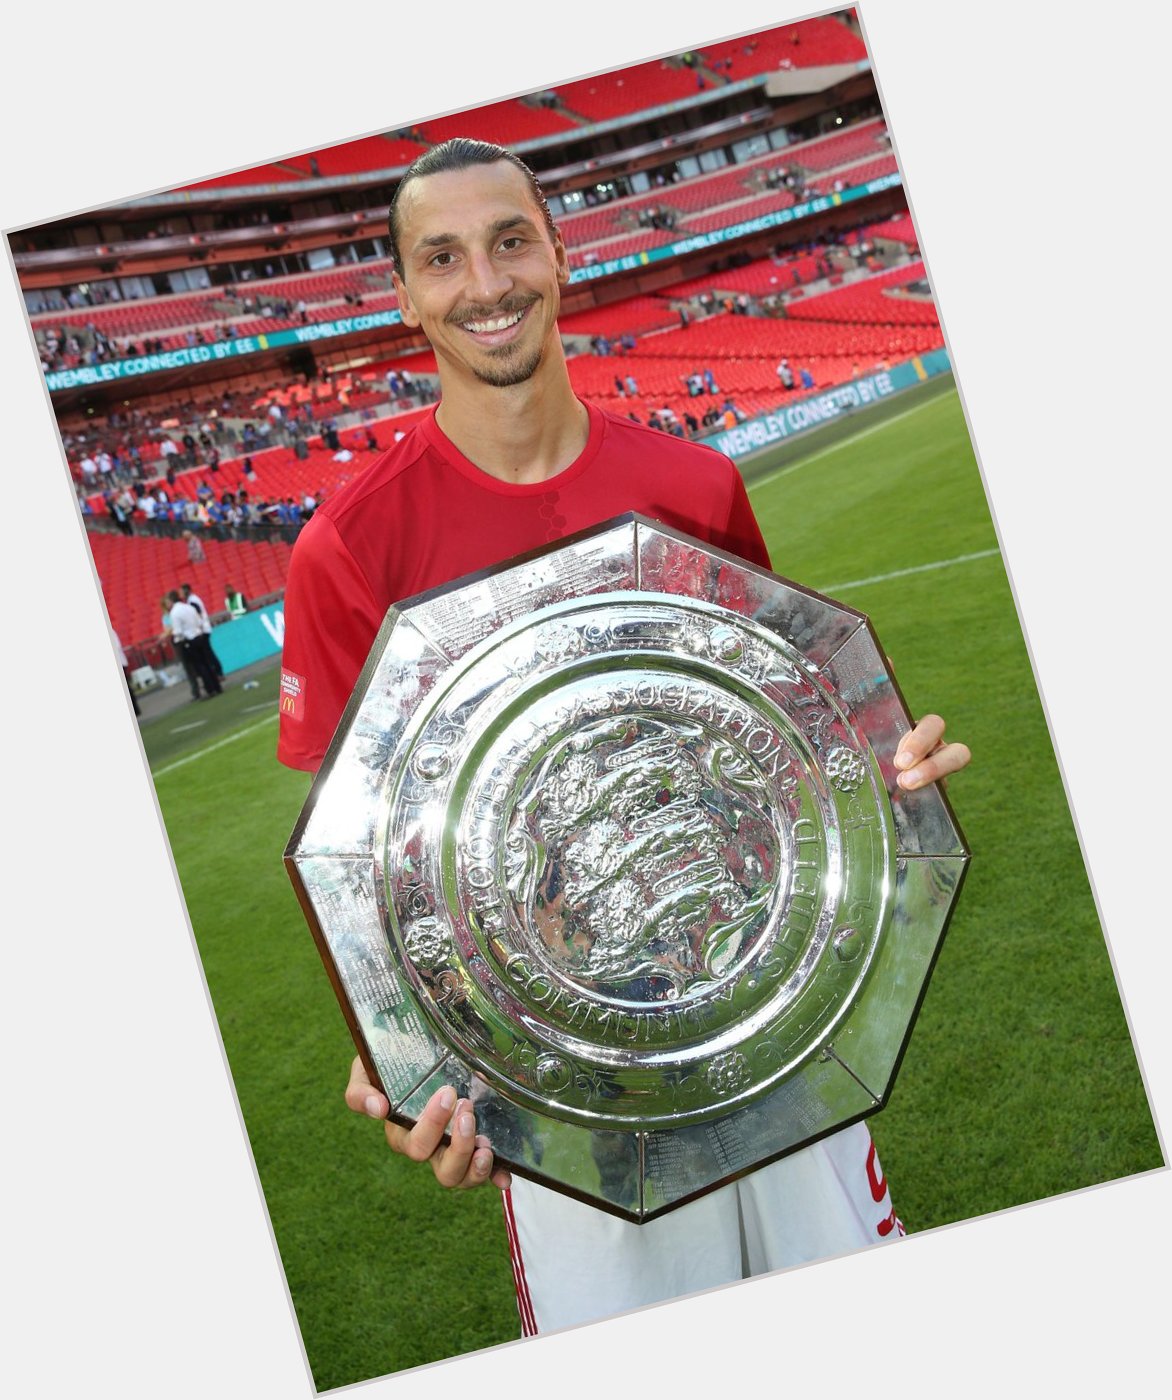  Happy 40th Birthday to Zlatan Ibrahimovic! What is your favourite Ibra moment from his time at 